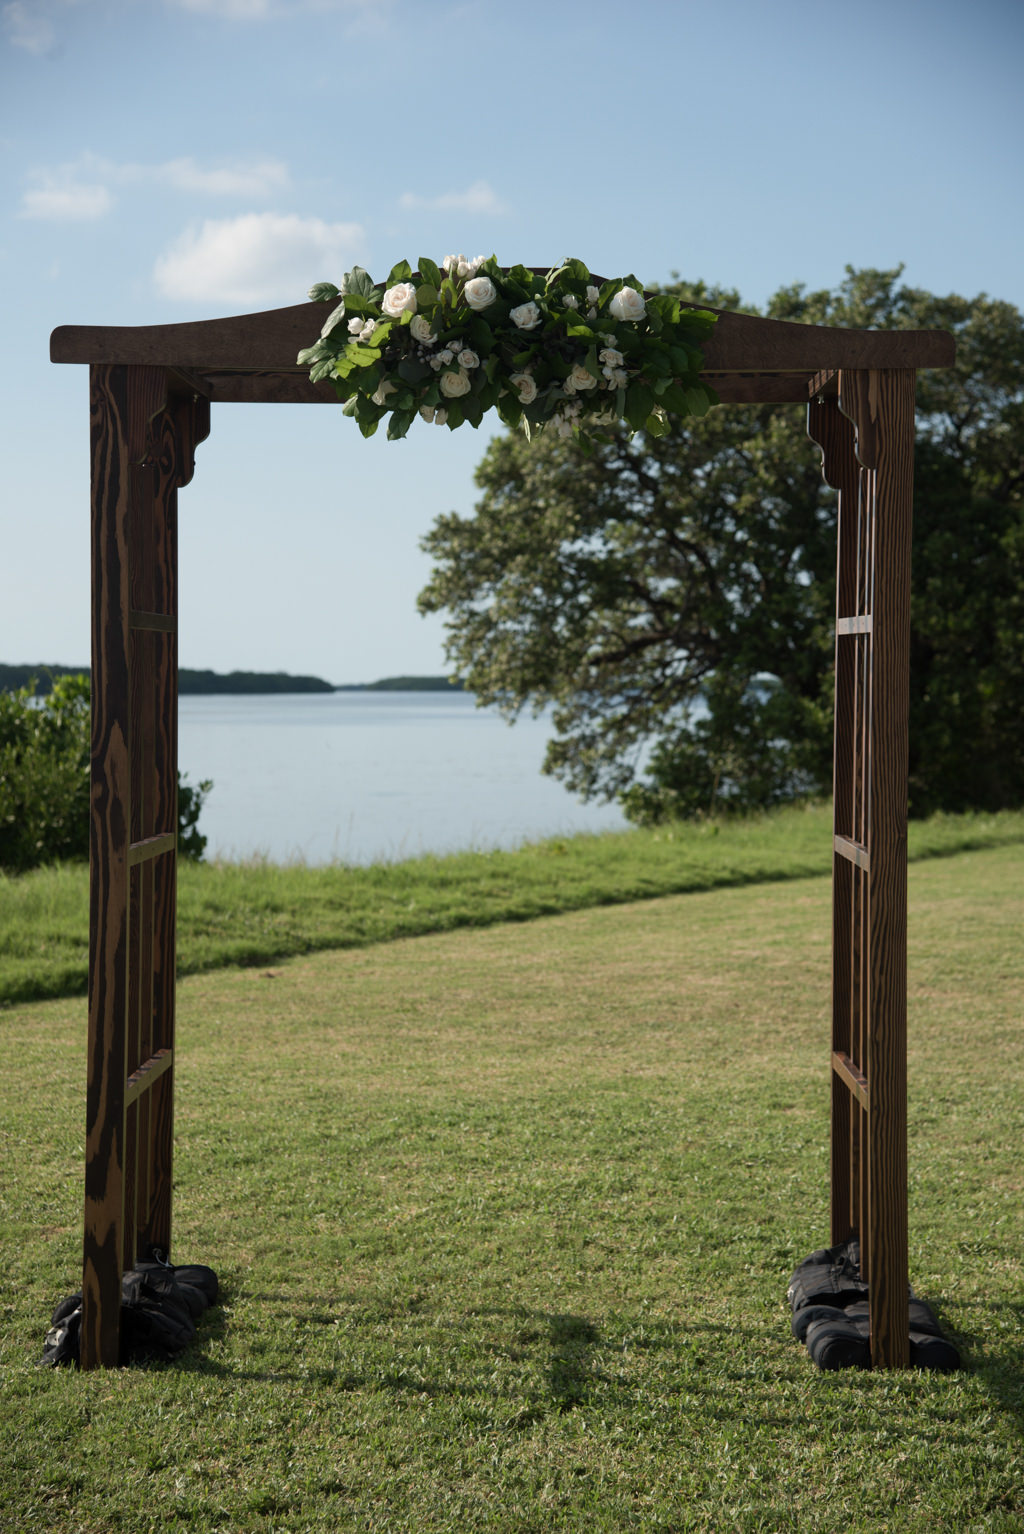 Outdoor Wedding Ceremony Decor, Wooden Arch with Greenery and White Floral Bouquet | Tampa Bay Wedding Florist Cotton and Magnolia